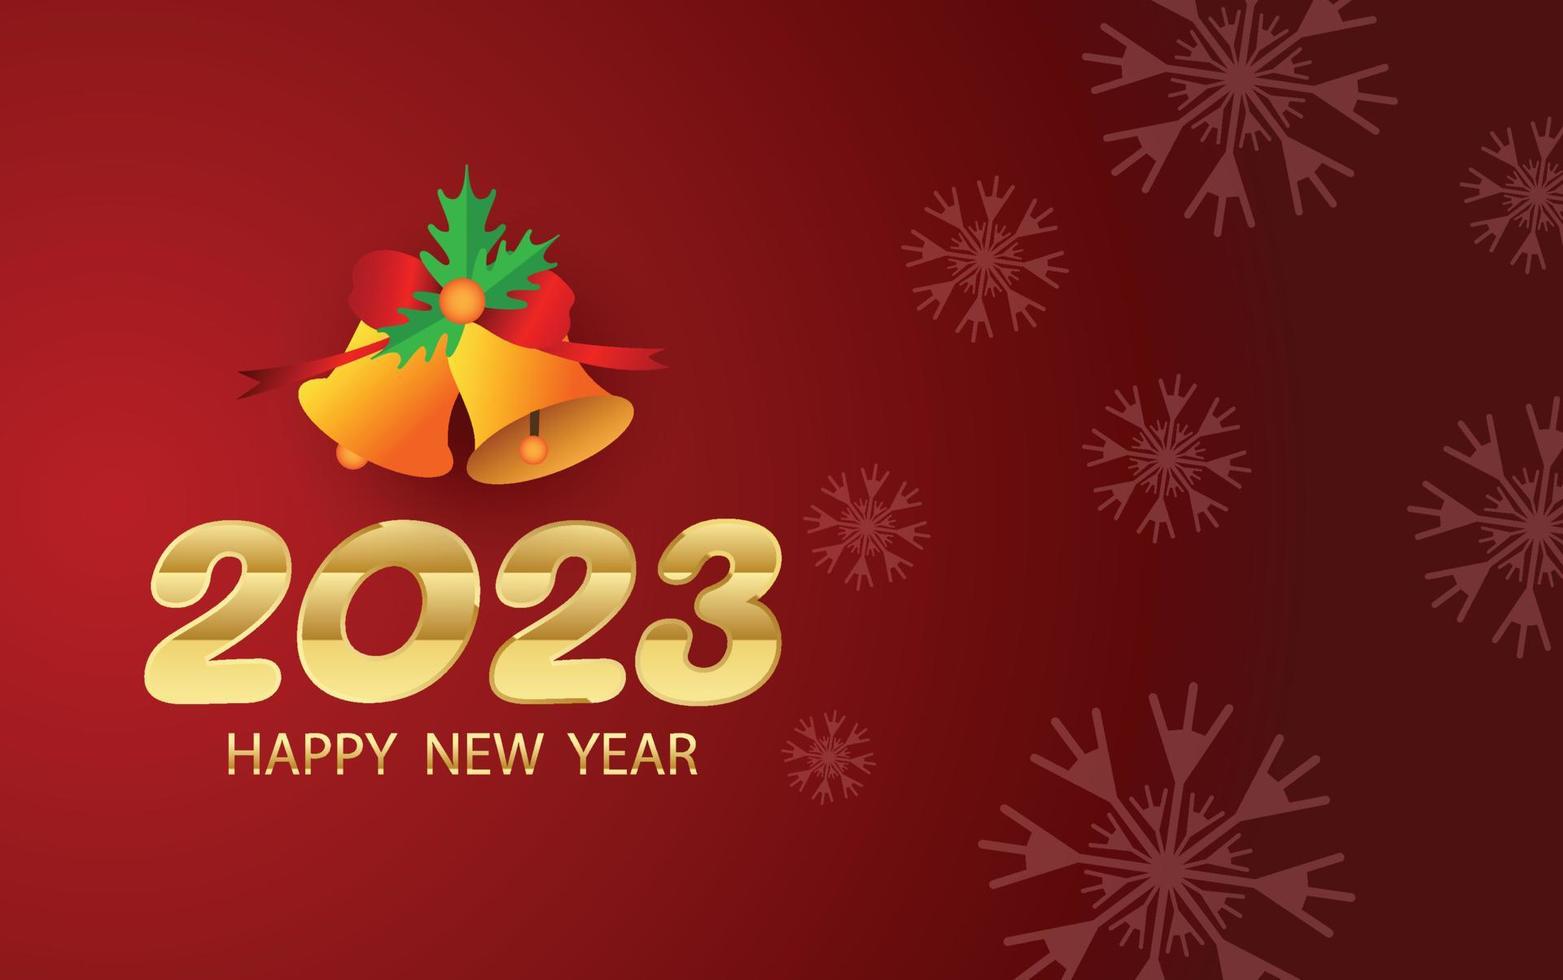 Happy New Year 2023 , background with Christmas snow, vector design.